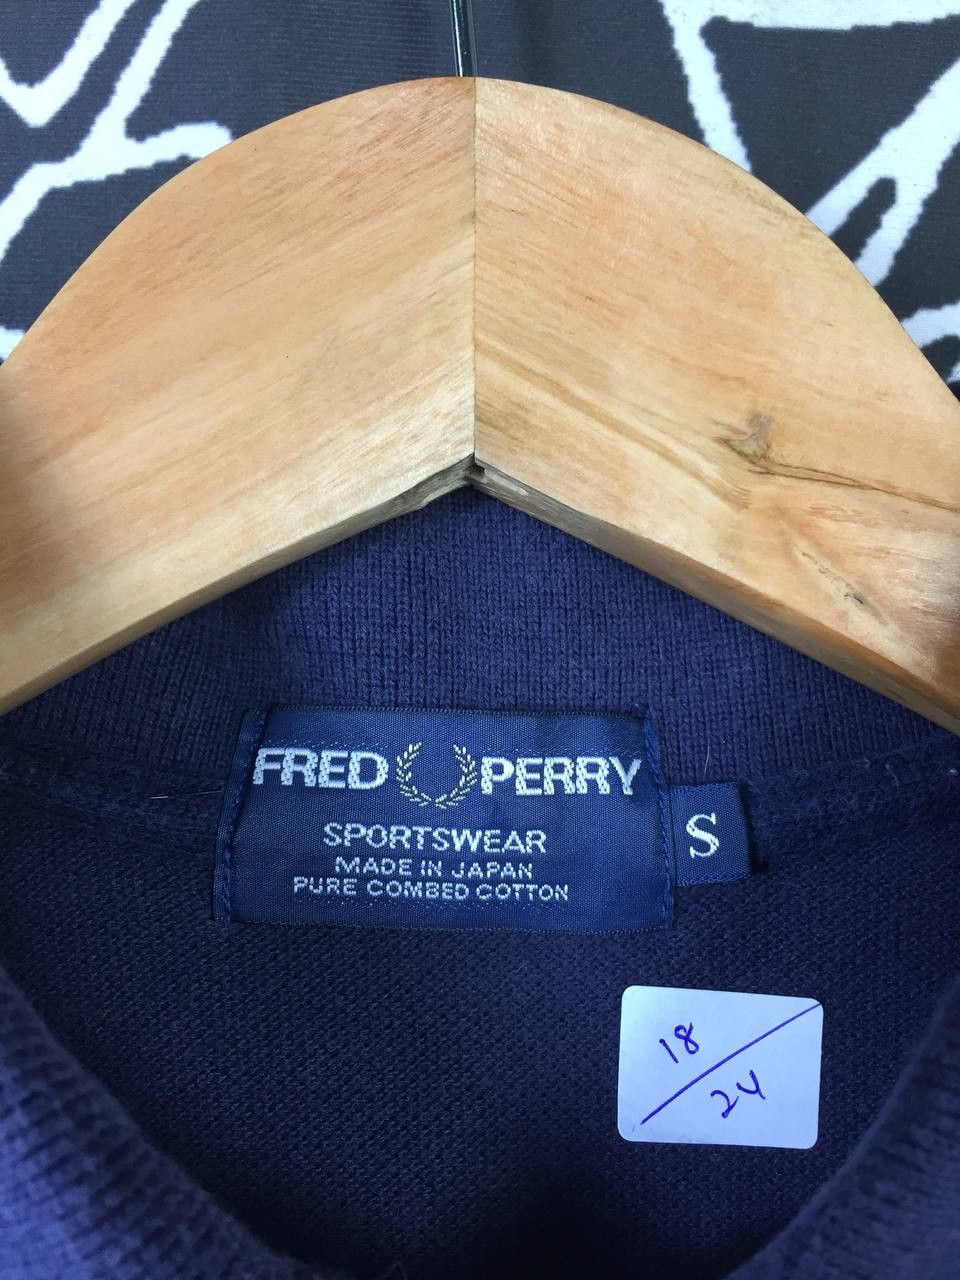 Vintage Vtg Fred Perry Sportswear Twin Tipped Polo Tee Size US S / EU 44-46 / 1 - 6 Thumbnail